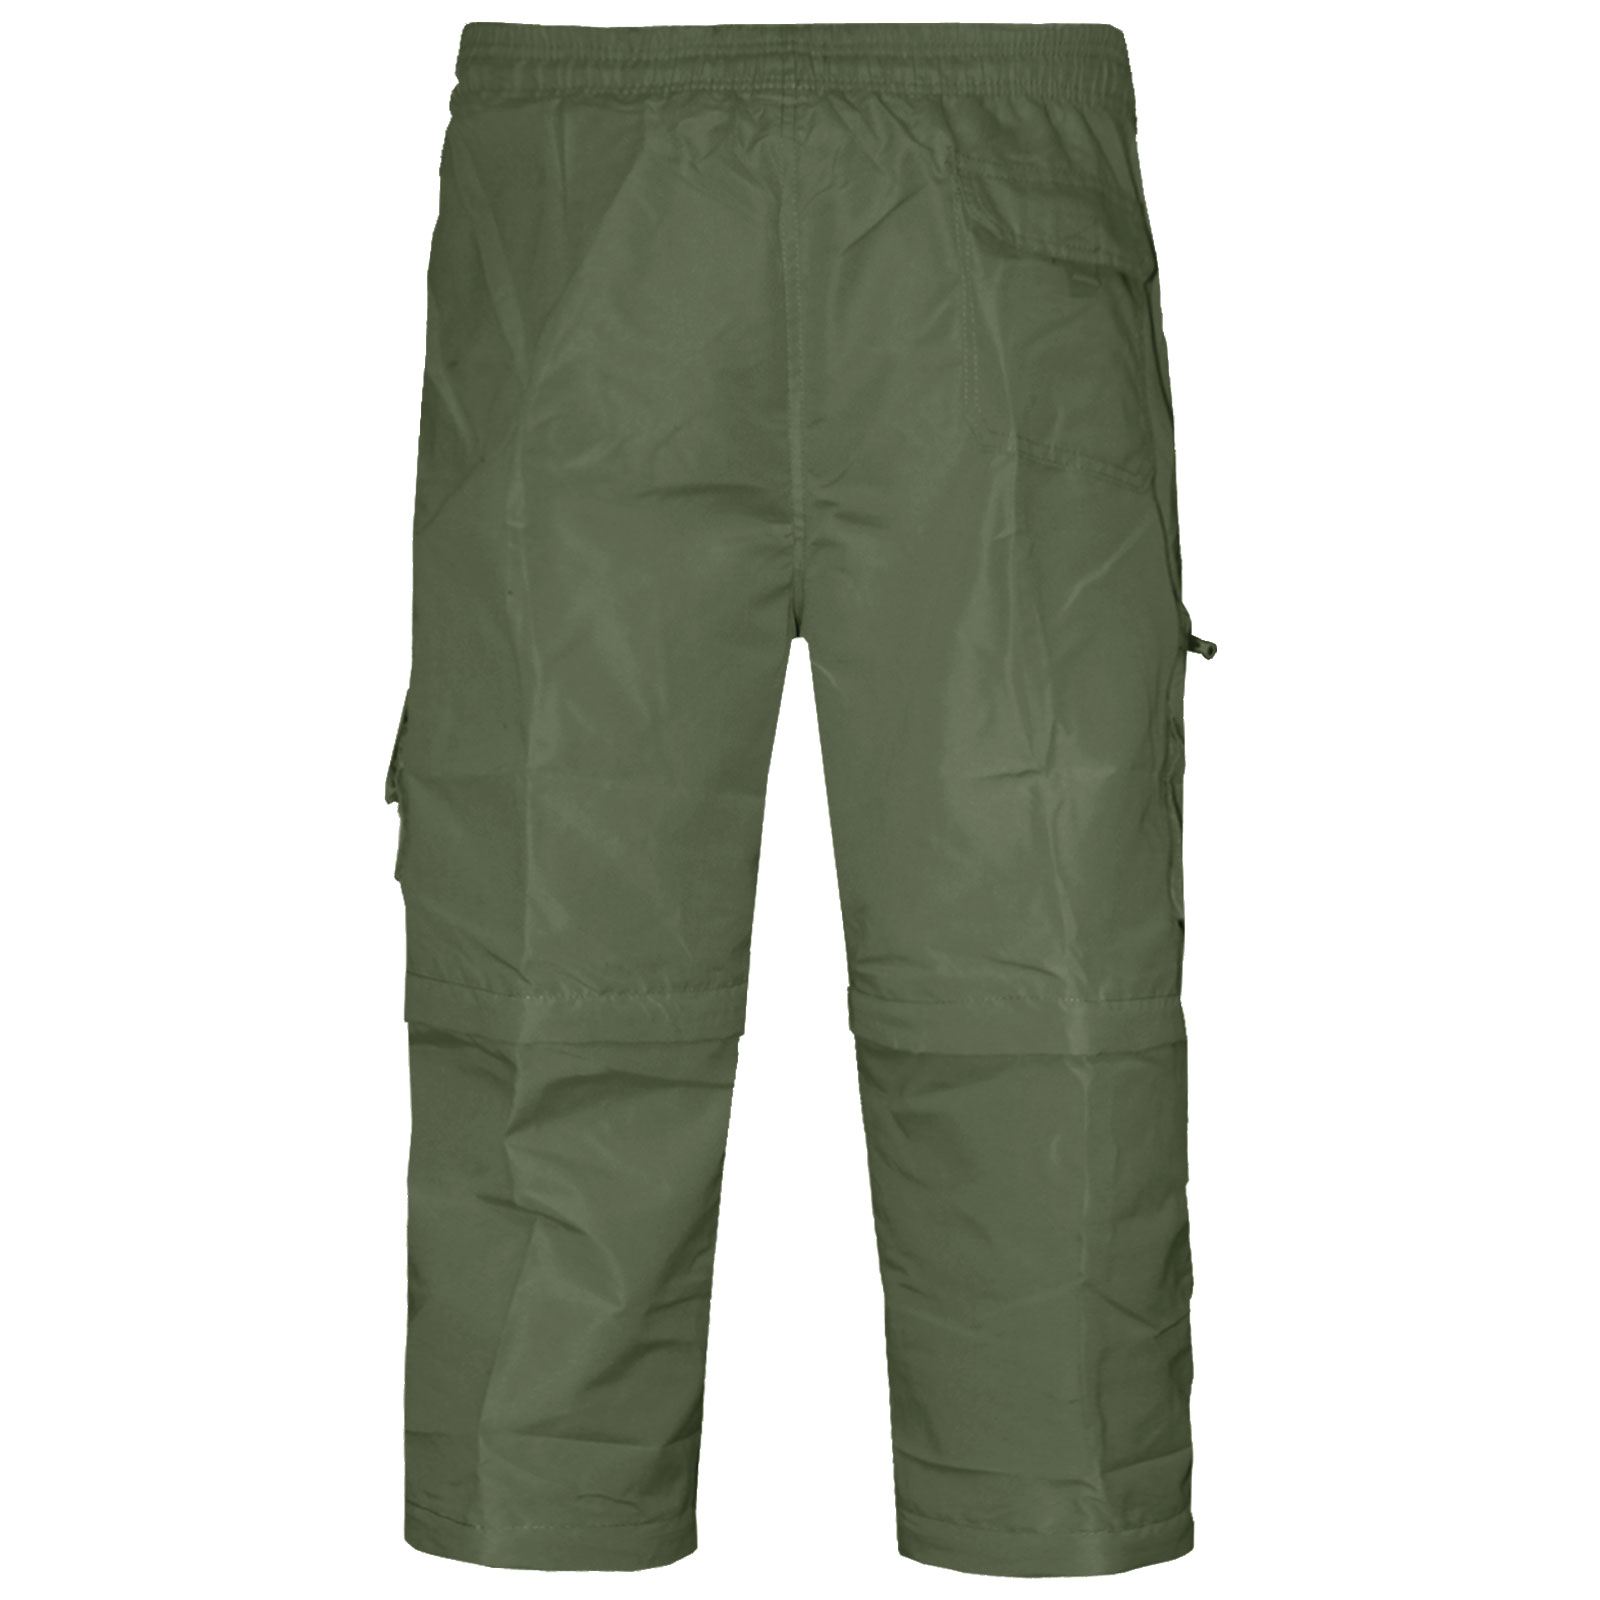 Mens 3/4 Elasticated Shorts 2 in 1 Zip Off Cargo Combat Long Pants Military Army 